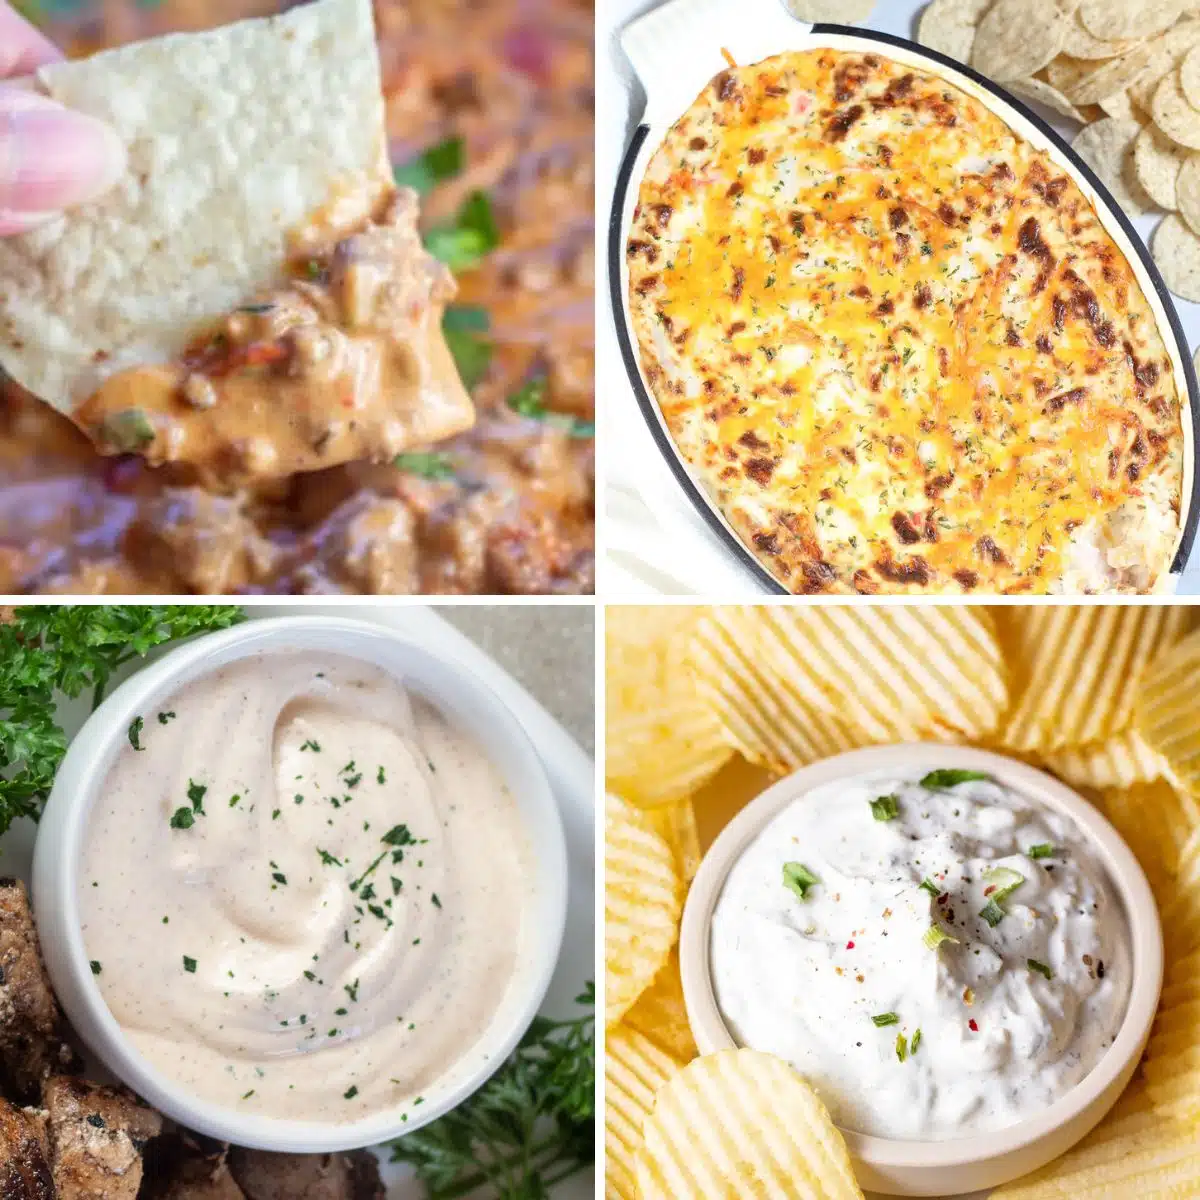 Best party dip recipes collection for any event featuring 4 easy dip recipes to serve hot or cold.